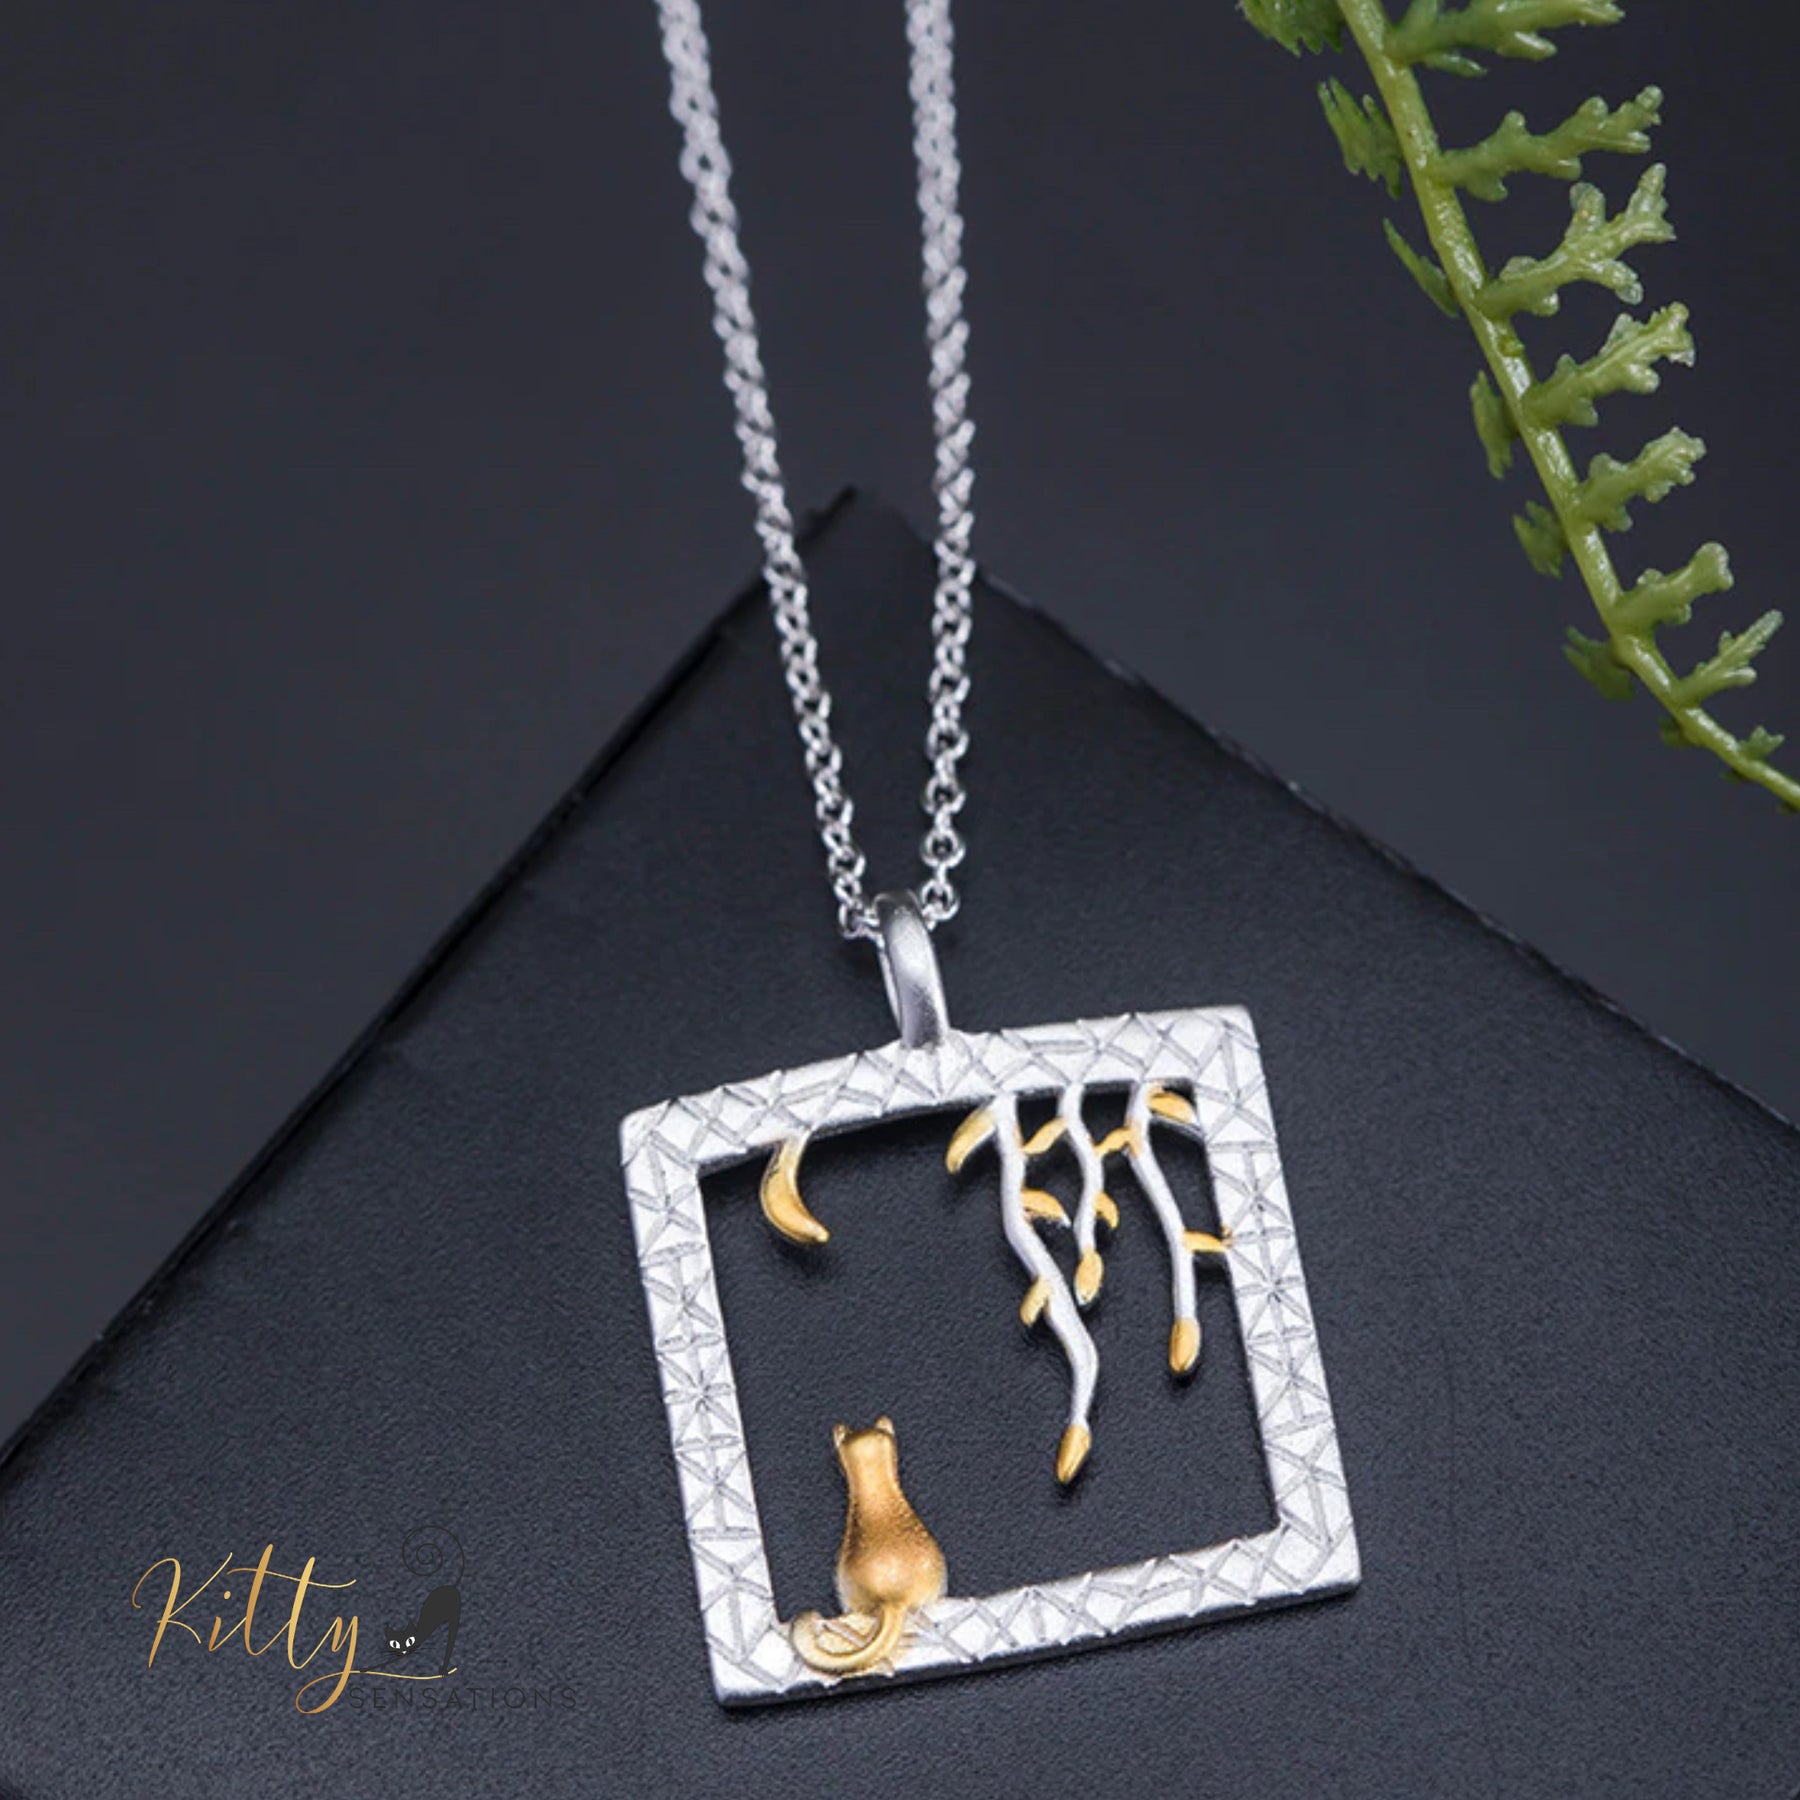 www.KittySensations.com: Golden Moon Kitty in Silver Square Necklace in Solid 925 Sterling Silver (18K Gold Plated) ($80.90): https://www.kittysensations.com/products/golden-moon-kitty-in-silver-square-necklace-in-solid-925-sterling-silver-18k-gold-plated